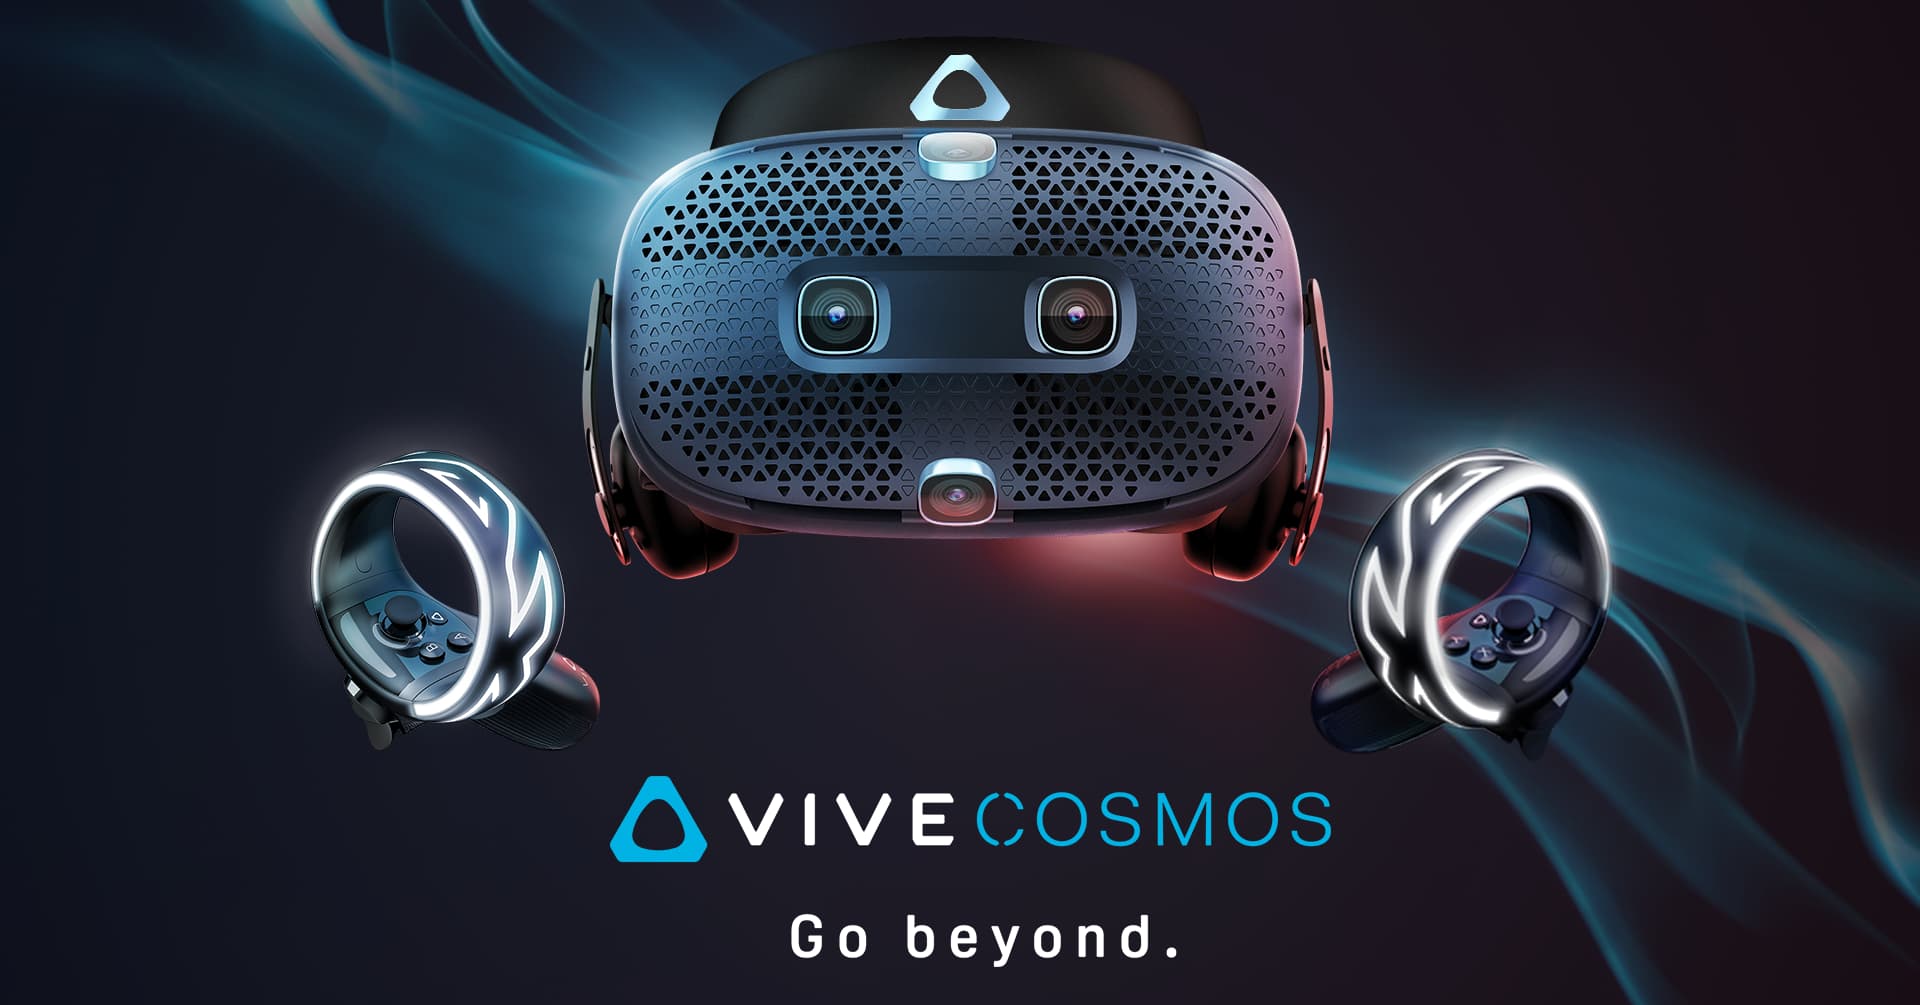 Image for Vive Cosmos arrives on October 3 for £699